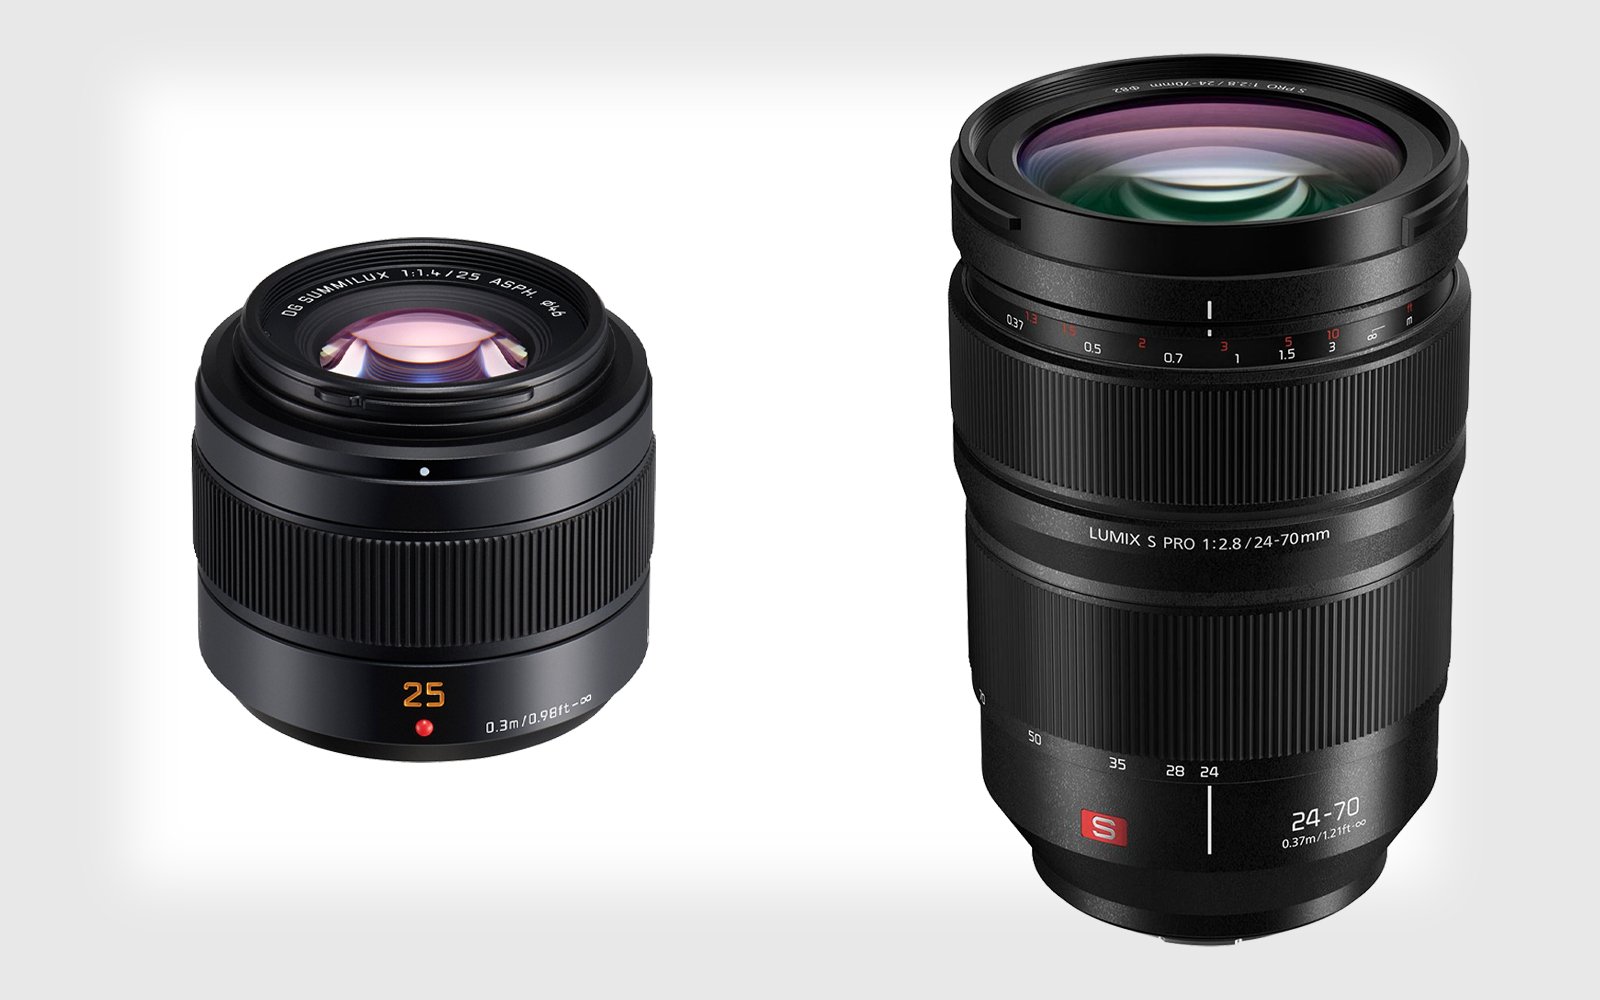 Panasonic Reveals 24-70mm f/2.8 for L-Mount and 25mm f/1.4 for MFT